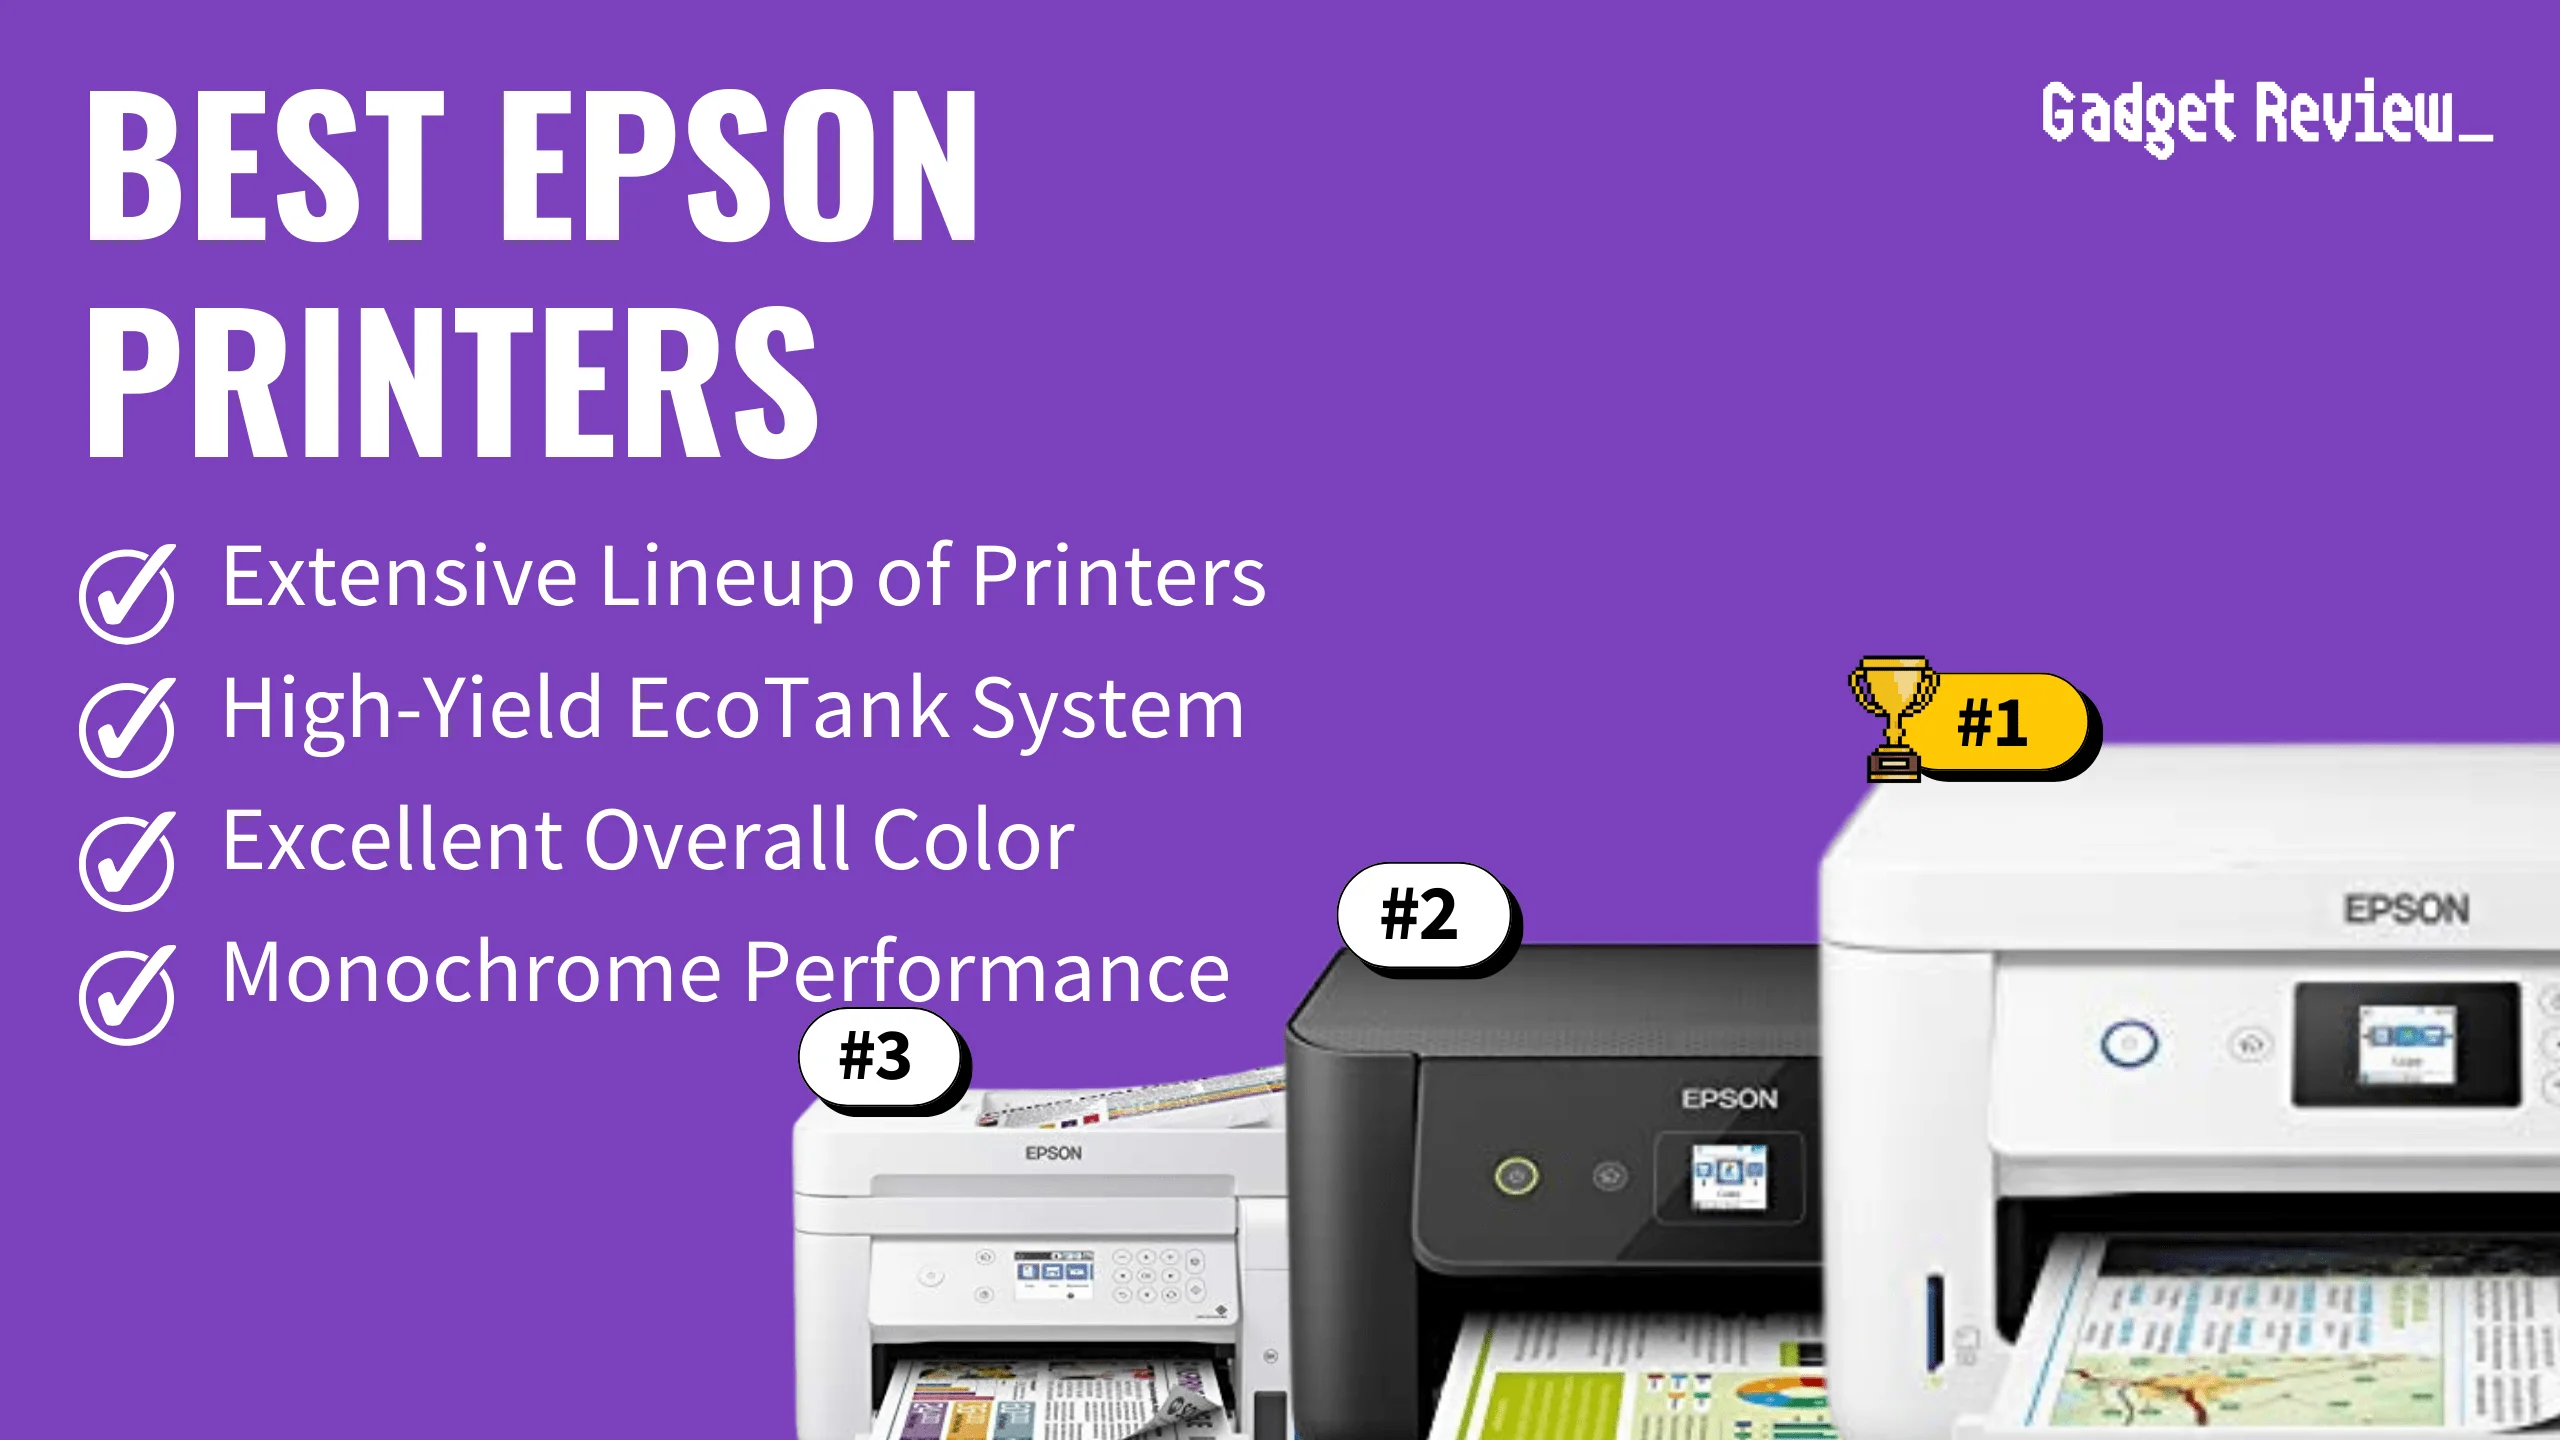 best epson printer featured image that shows the top three best all-in-one printer models